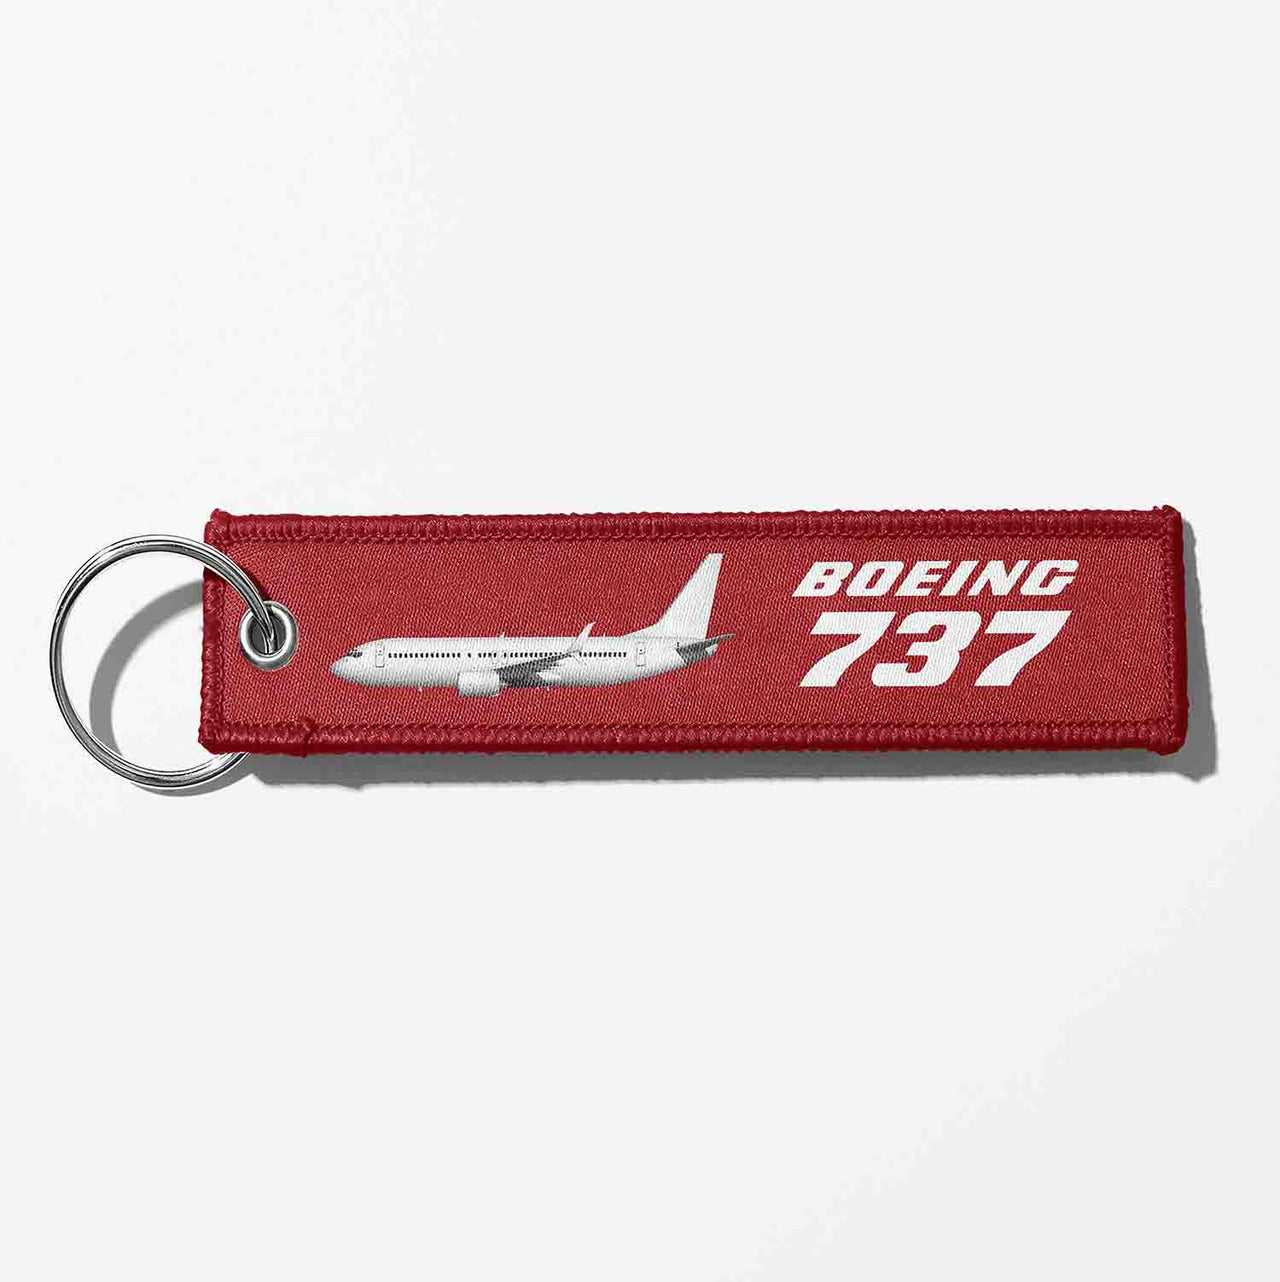 The Boeing 737 Designed Key Chains